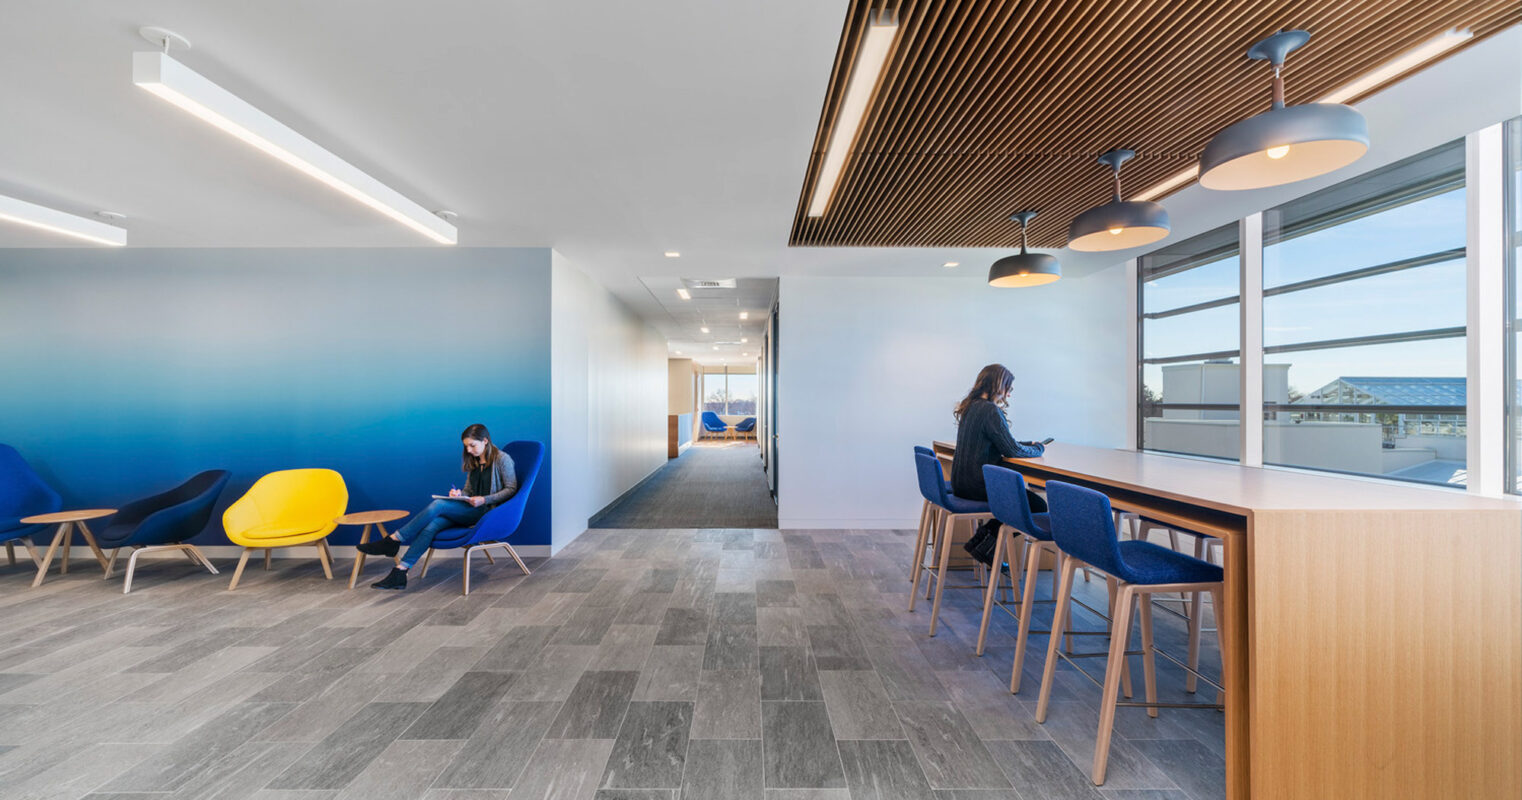 Contemporary office lounge with vibrant blue walls, contrasting yellow and blue furniture, and sleek, linear lighting fixtures. Wood accents in ceiling details and partitioning add warmth to the minimalist design, and floor-to-ceiling windows flood the space with natural light.